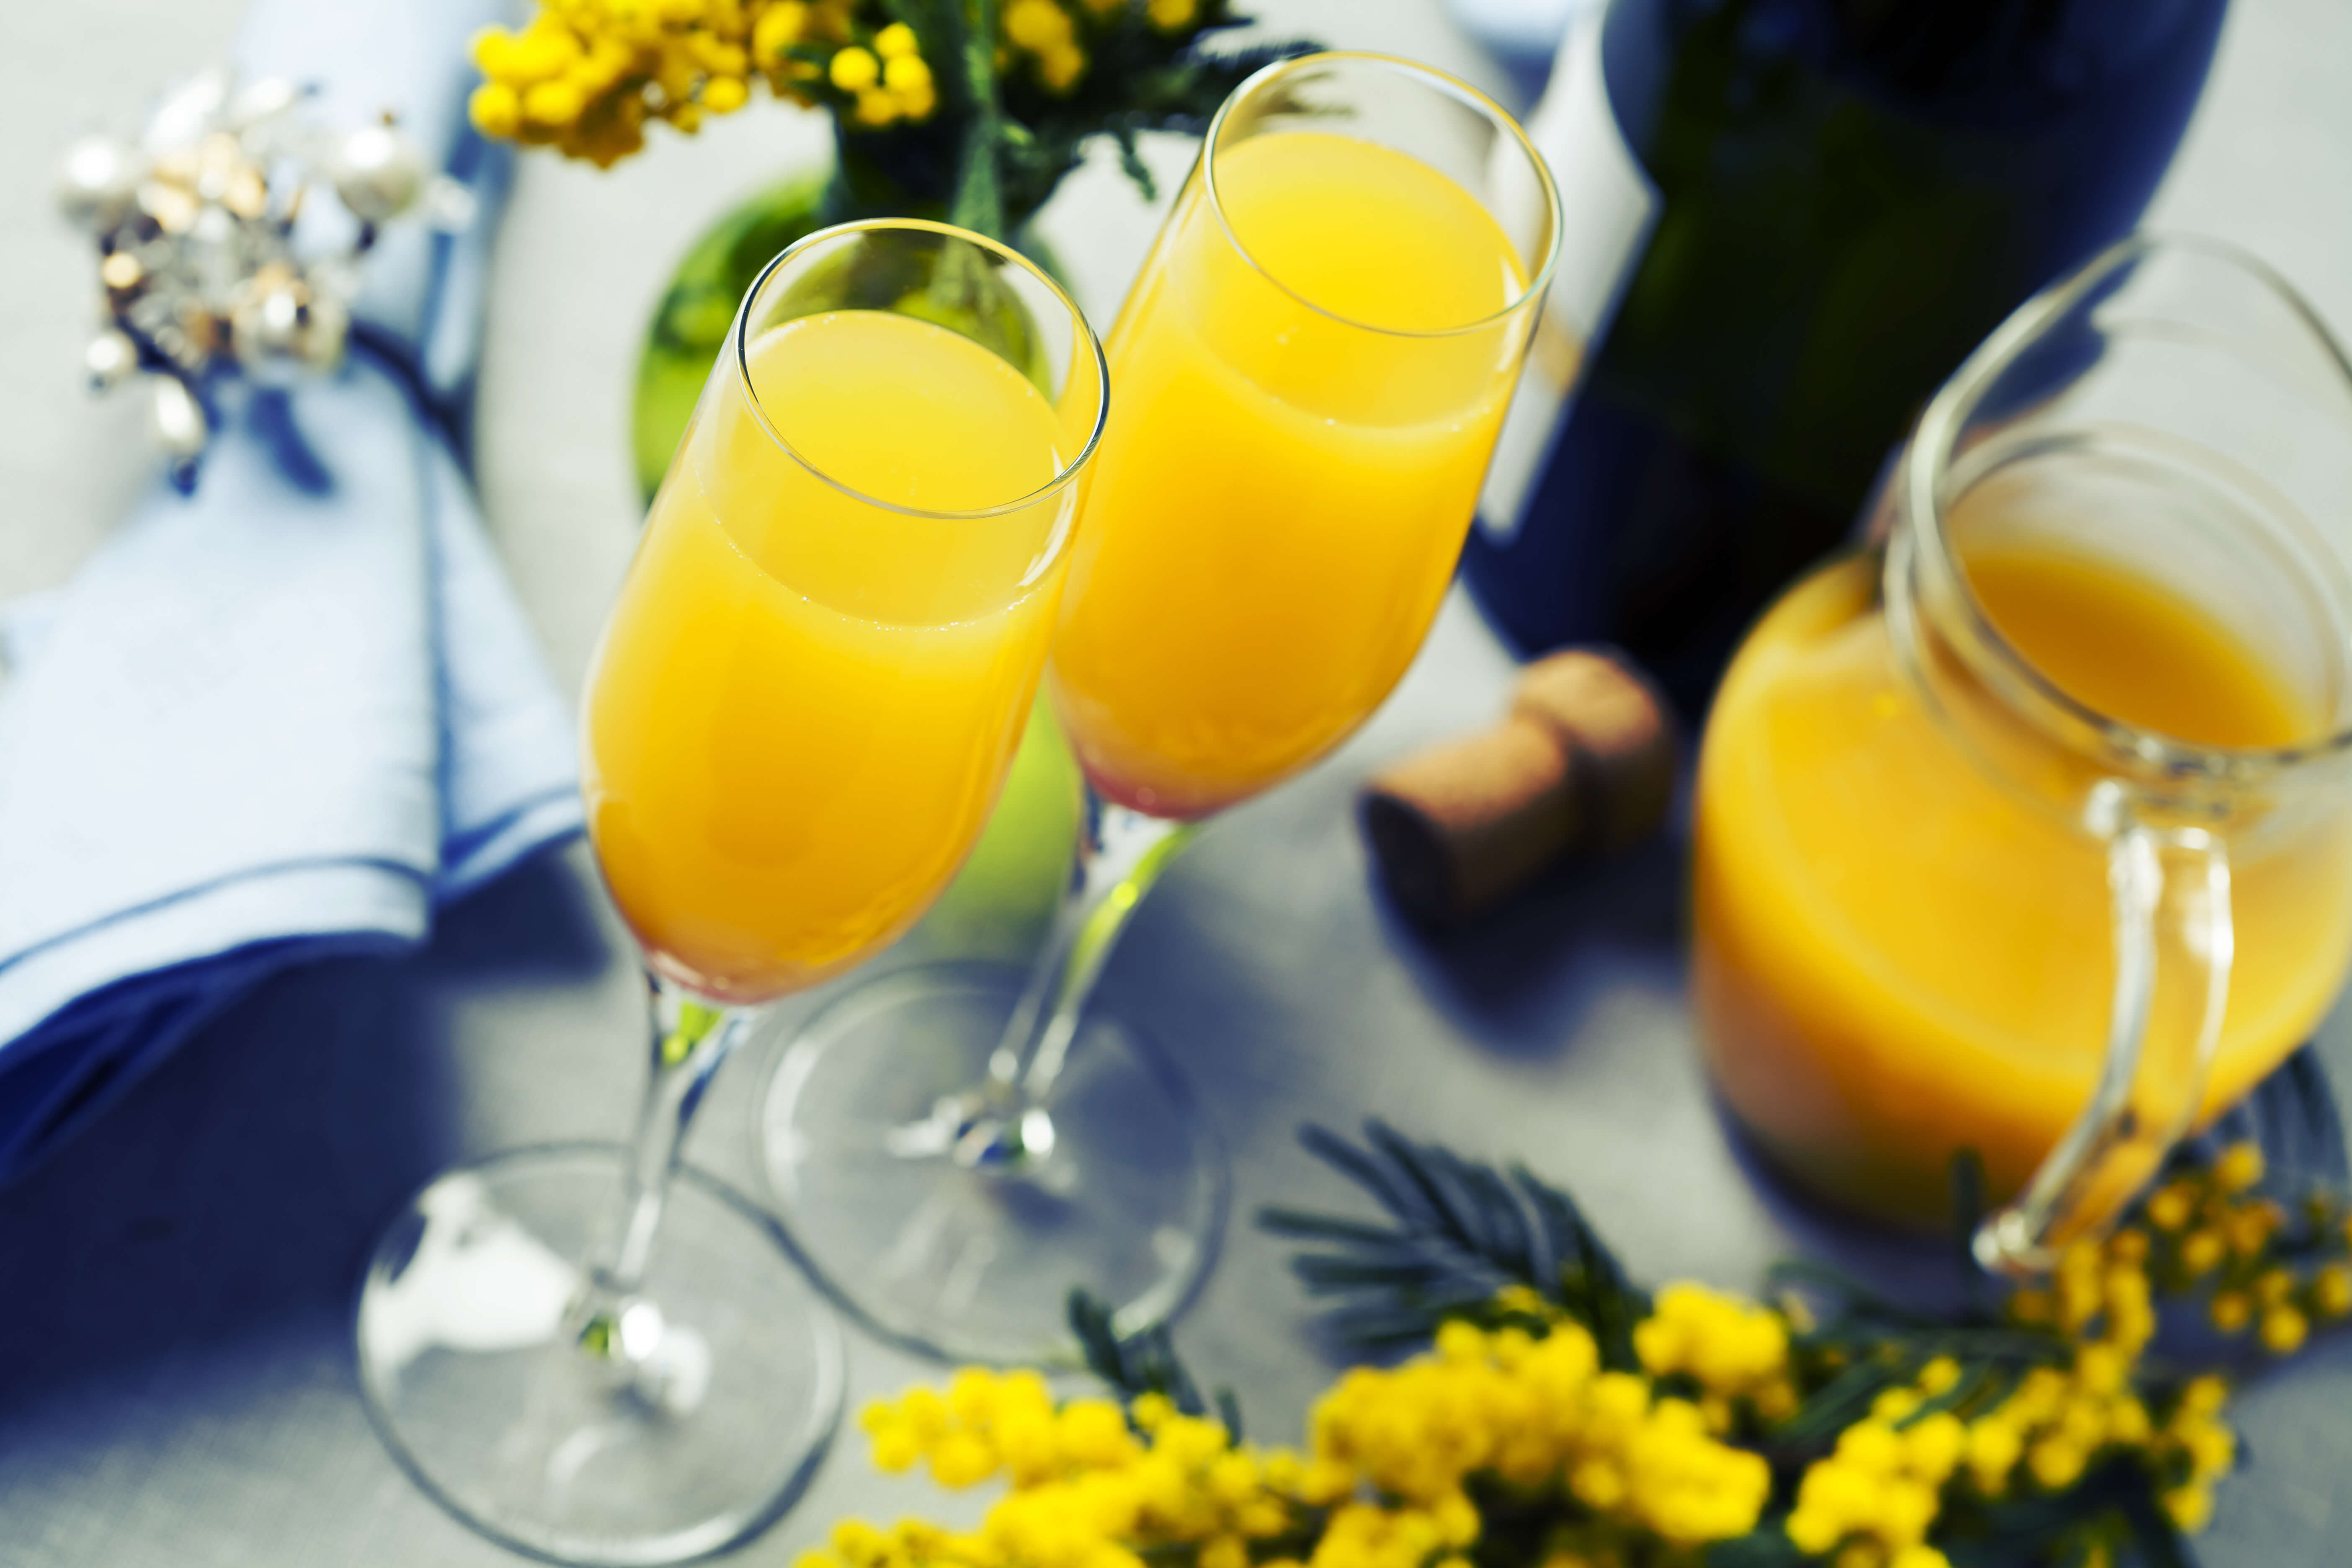 Celebrate National Mimosa Day in Baltimore